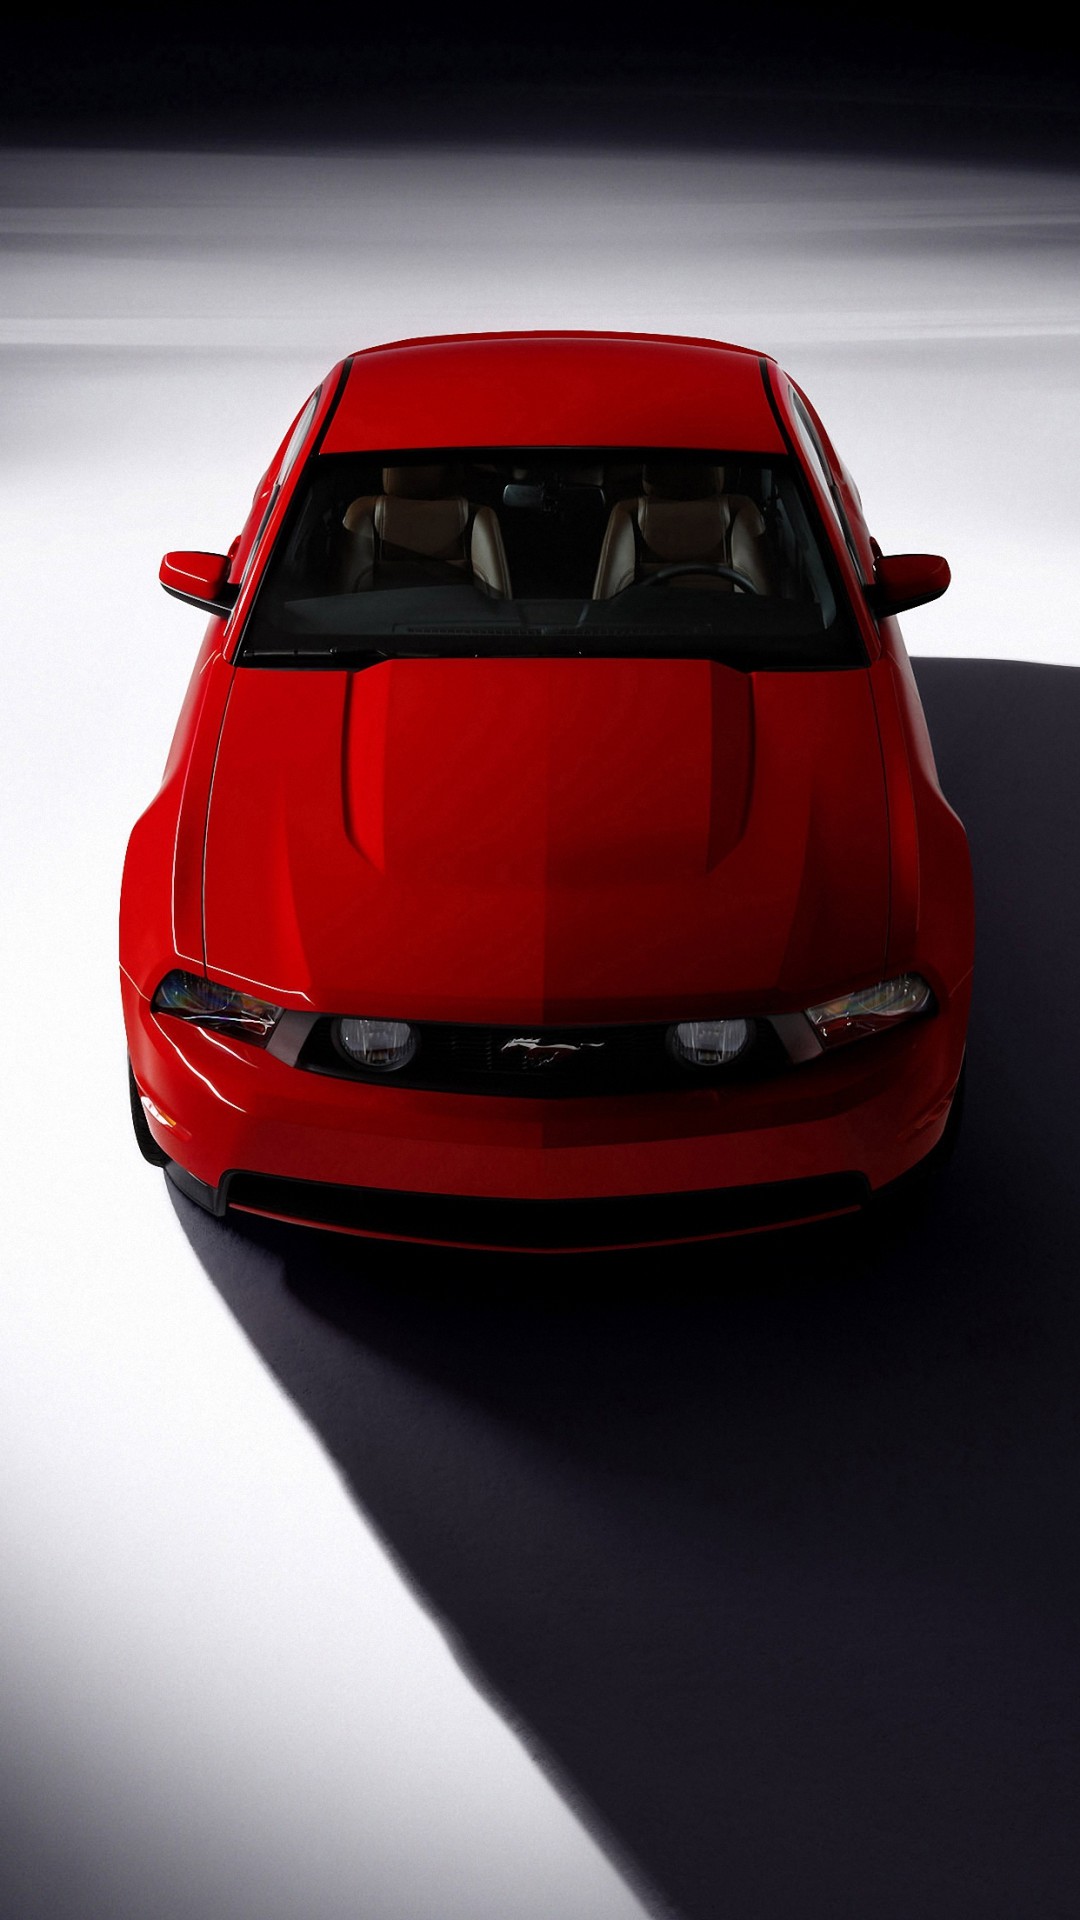 Ford Mustang Iphone Wallpapers